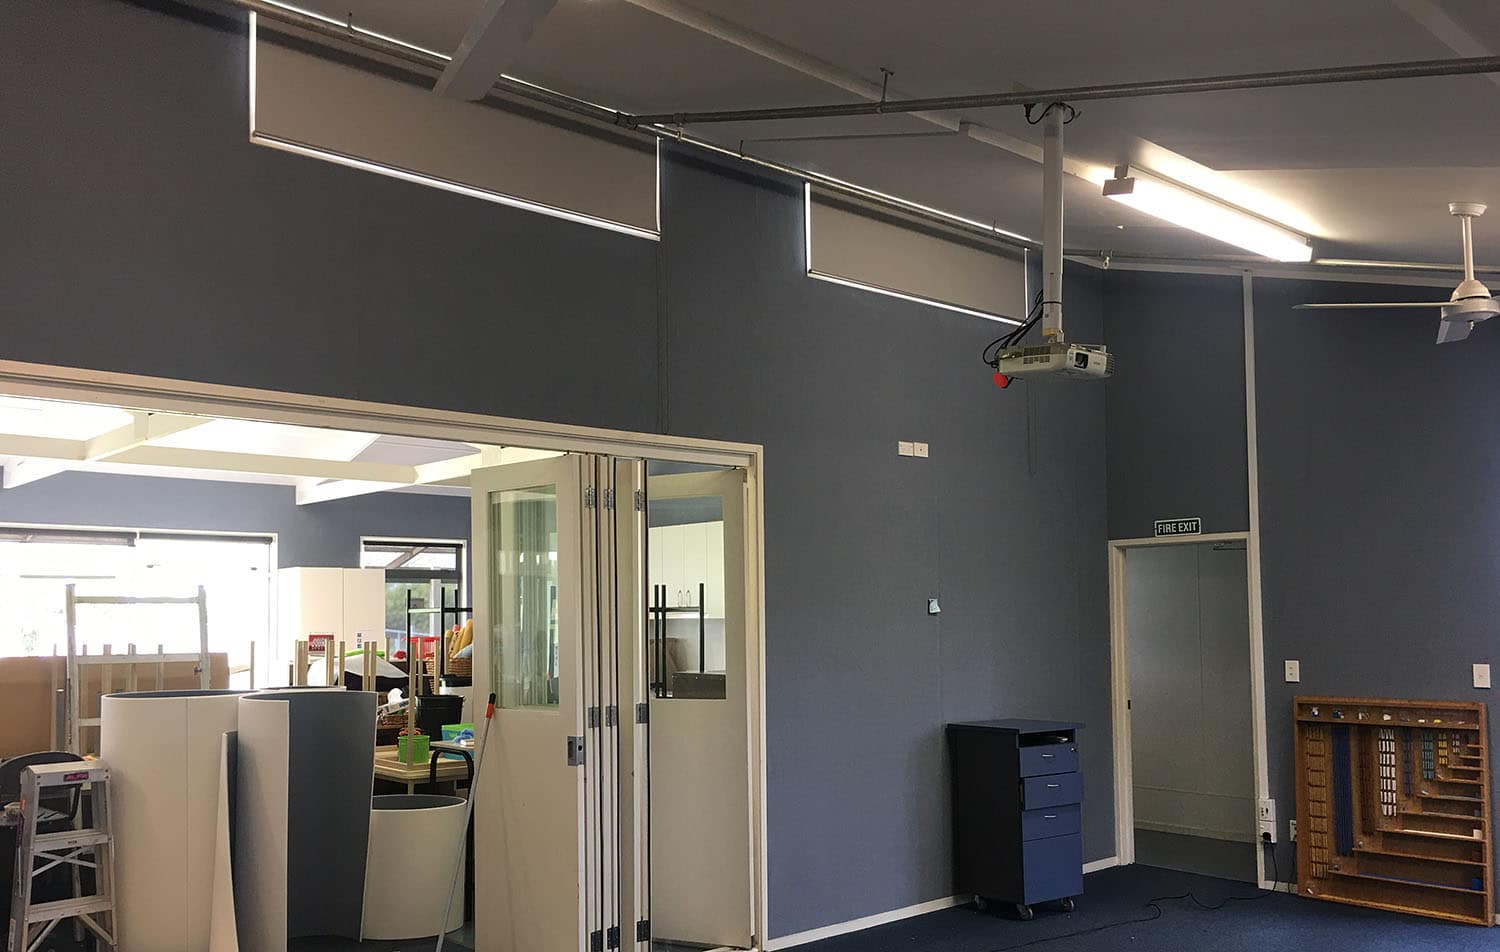 autex wall covering installed in Eastern Montessori school